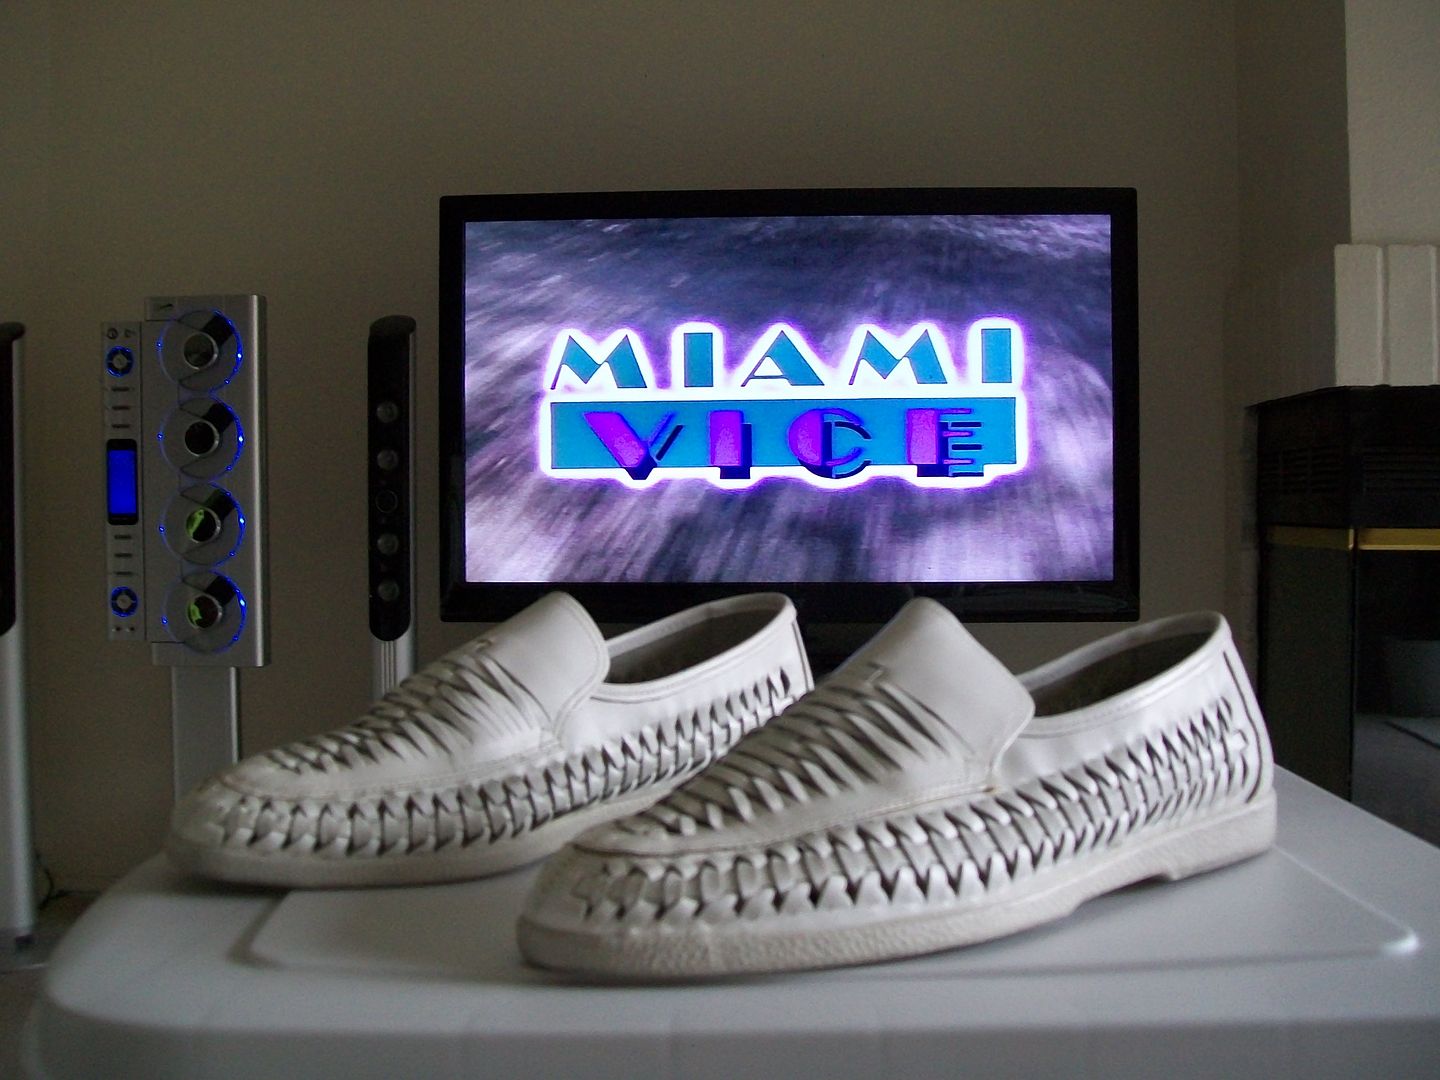 CROCKETT'S SHOES! Page 2 Cooper & Miami Vice